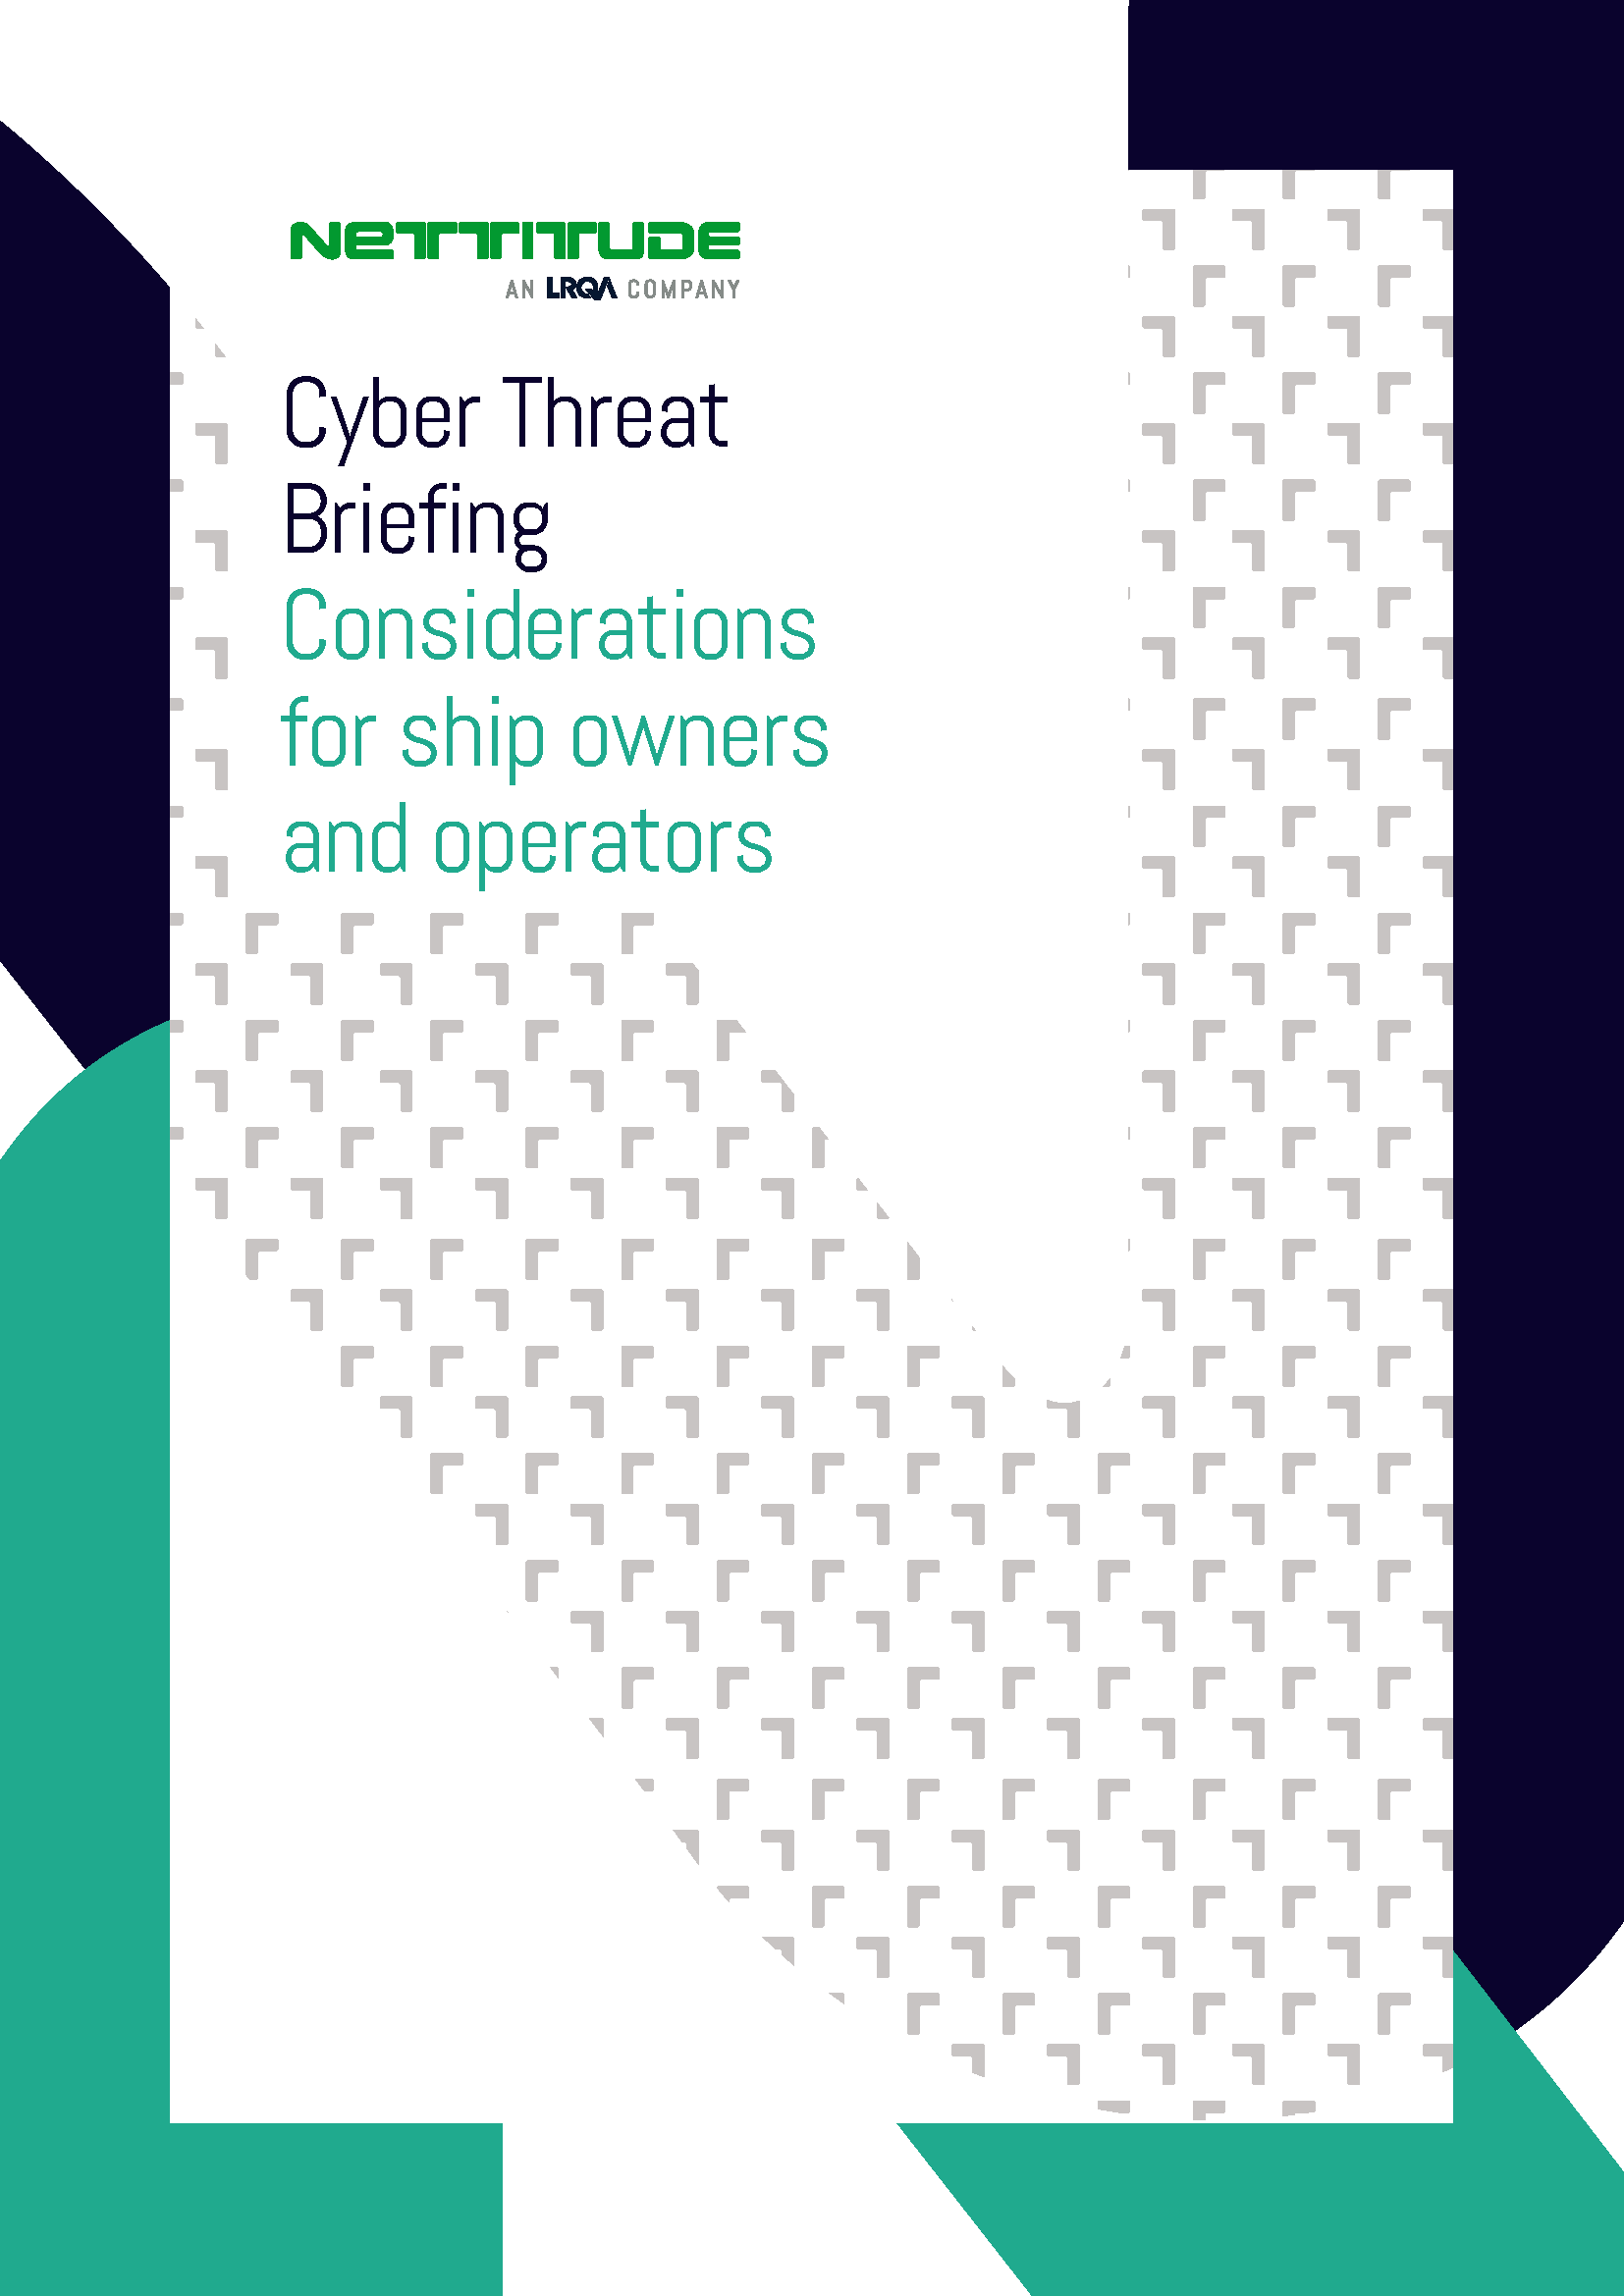 Pages from NETT_MO_CYBER_THREAT_BRIEFING_2021-1